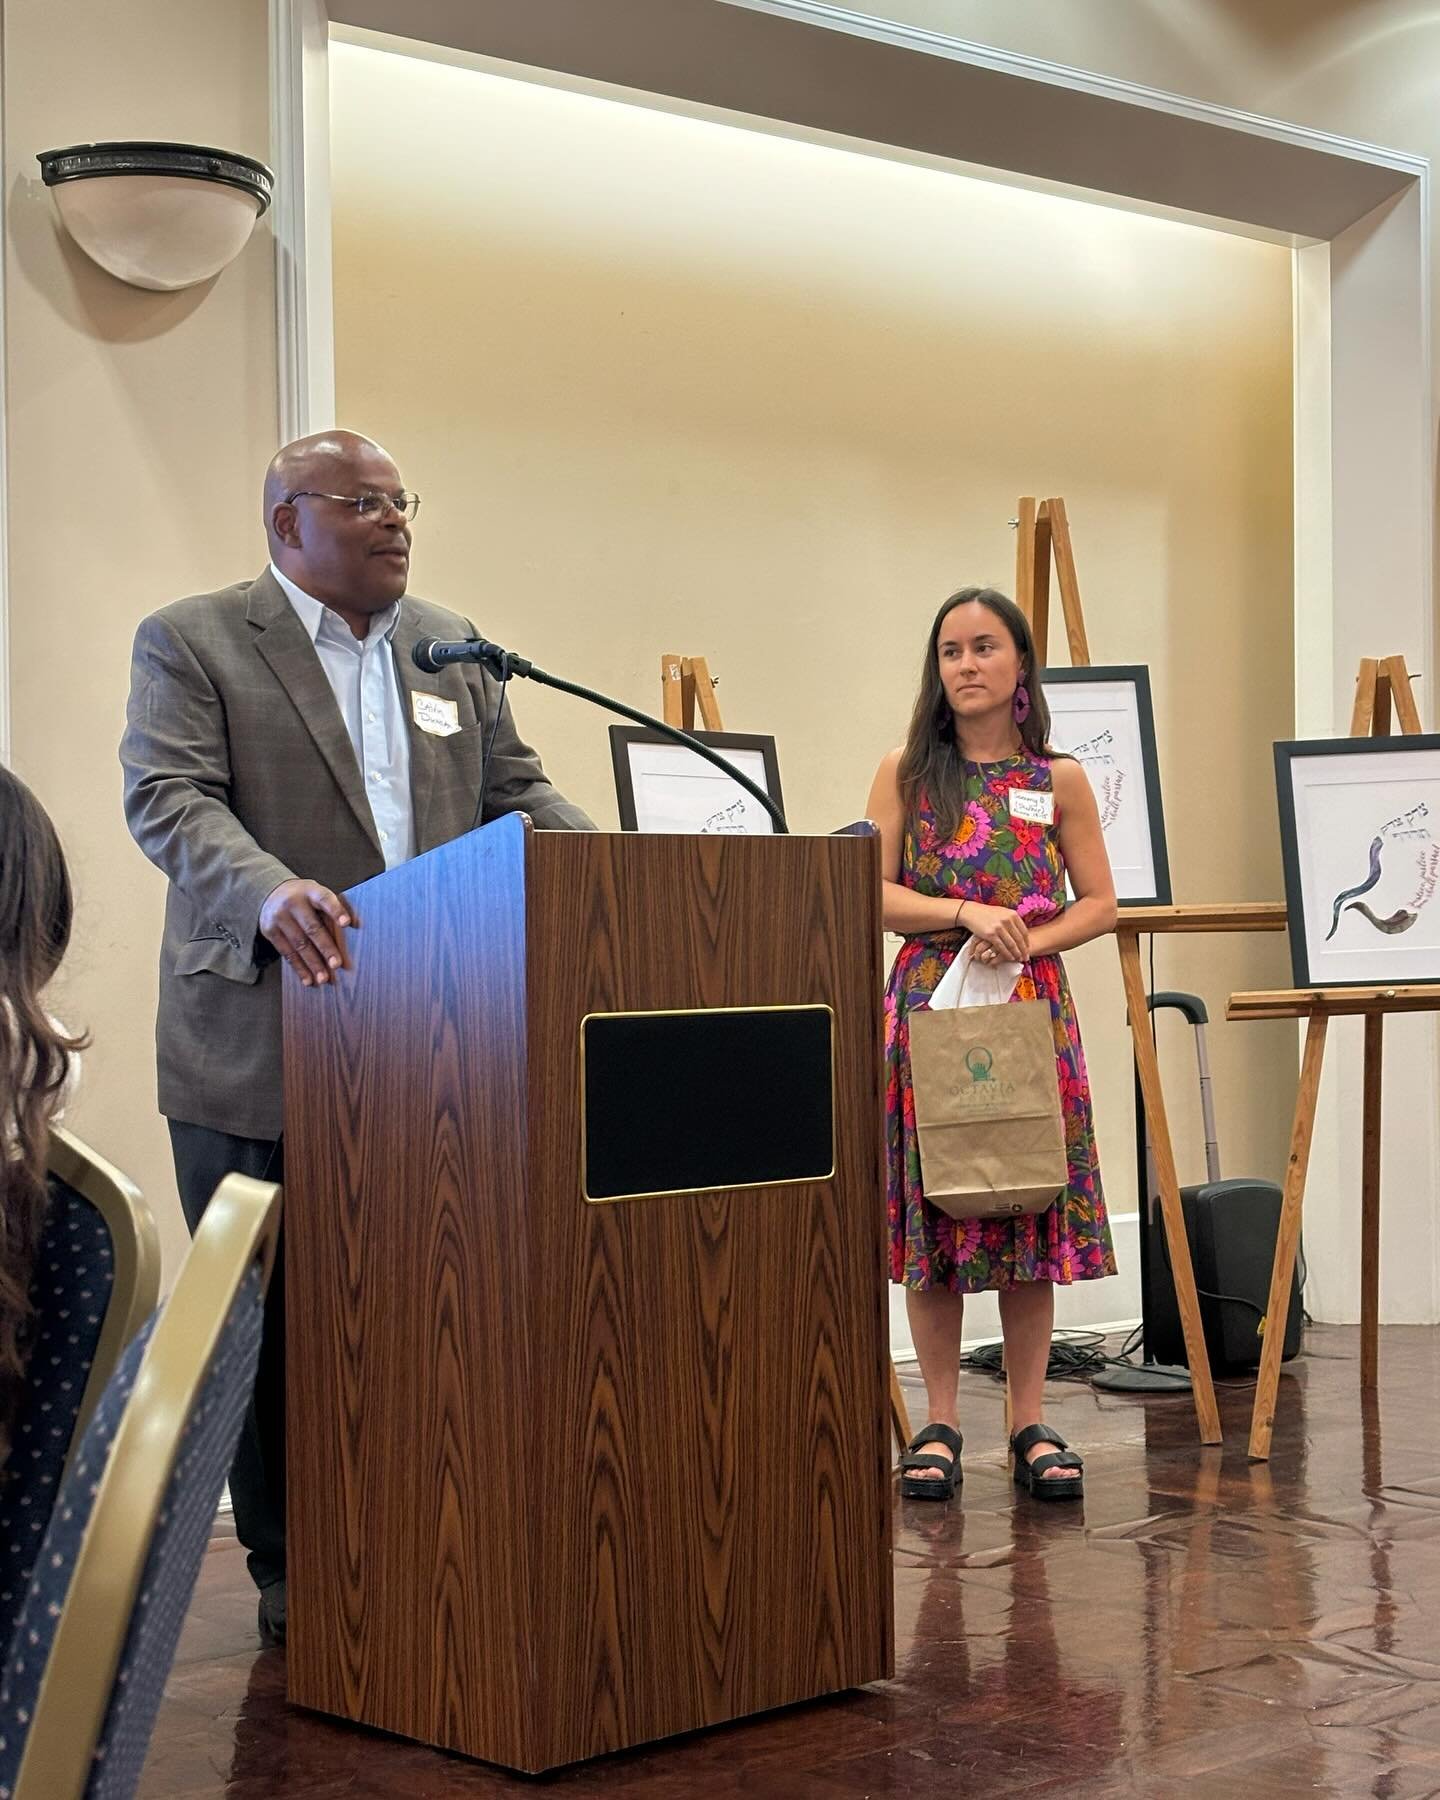 At their annual Partners in Justice event last Sunday at Temple Sinai, the Avodah program honored Calvin Duncan as an &ldquo;Extraordinary Social Justice Leader.&rdquo;

Calvin was privileged to be recognized by @weareavodah, an organization that wor